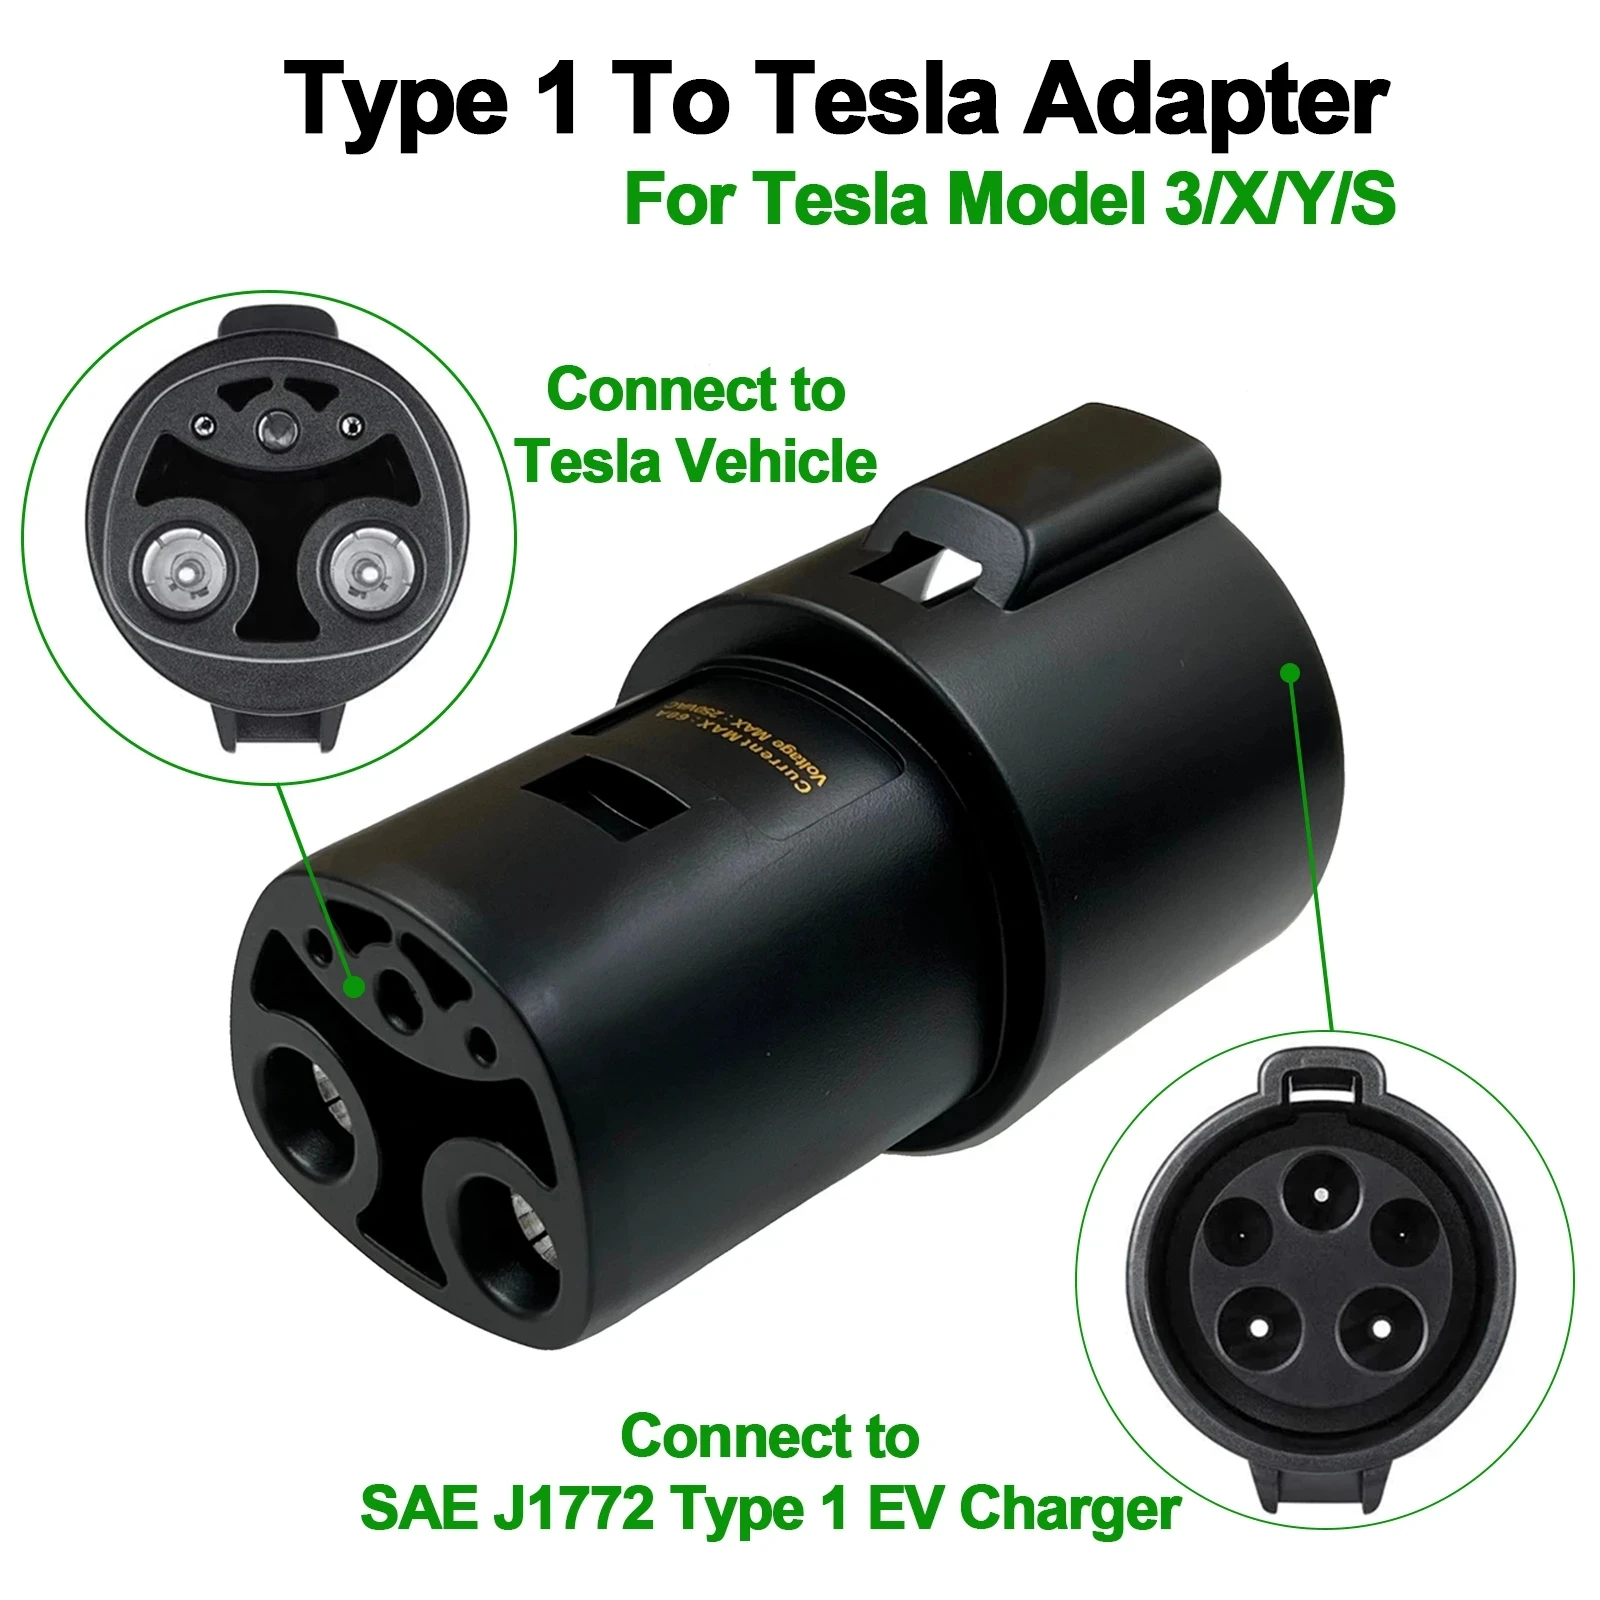 EV Charger Adapter Electric Car Charging Connector For Tesla Model X Y 3 S  SAE J1772 Type 1 To Adapter For Tesla EVSE - AliExpress